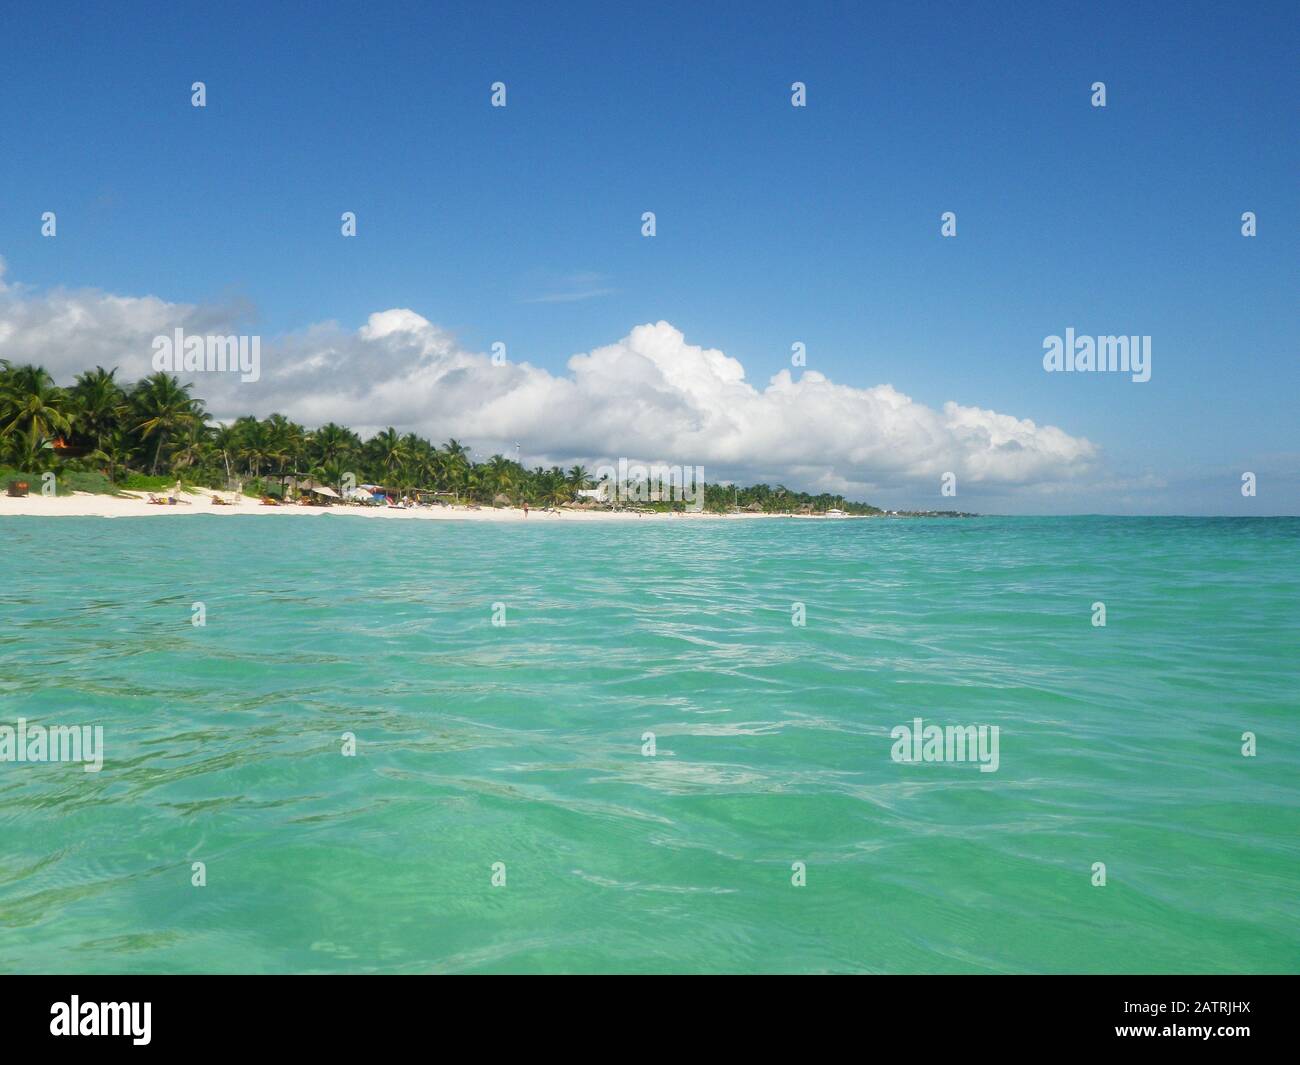 The Beach at Tulum as seen from the turquoise water, Tulum, Quintana Roo, Mexico on a beautiful sunny day. Stock Photo